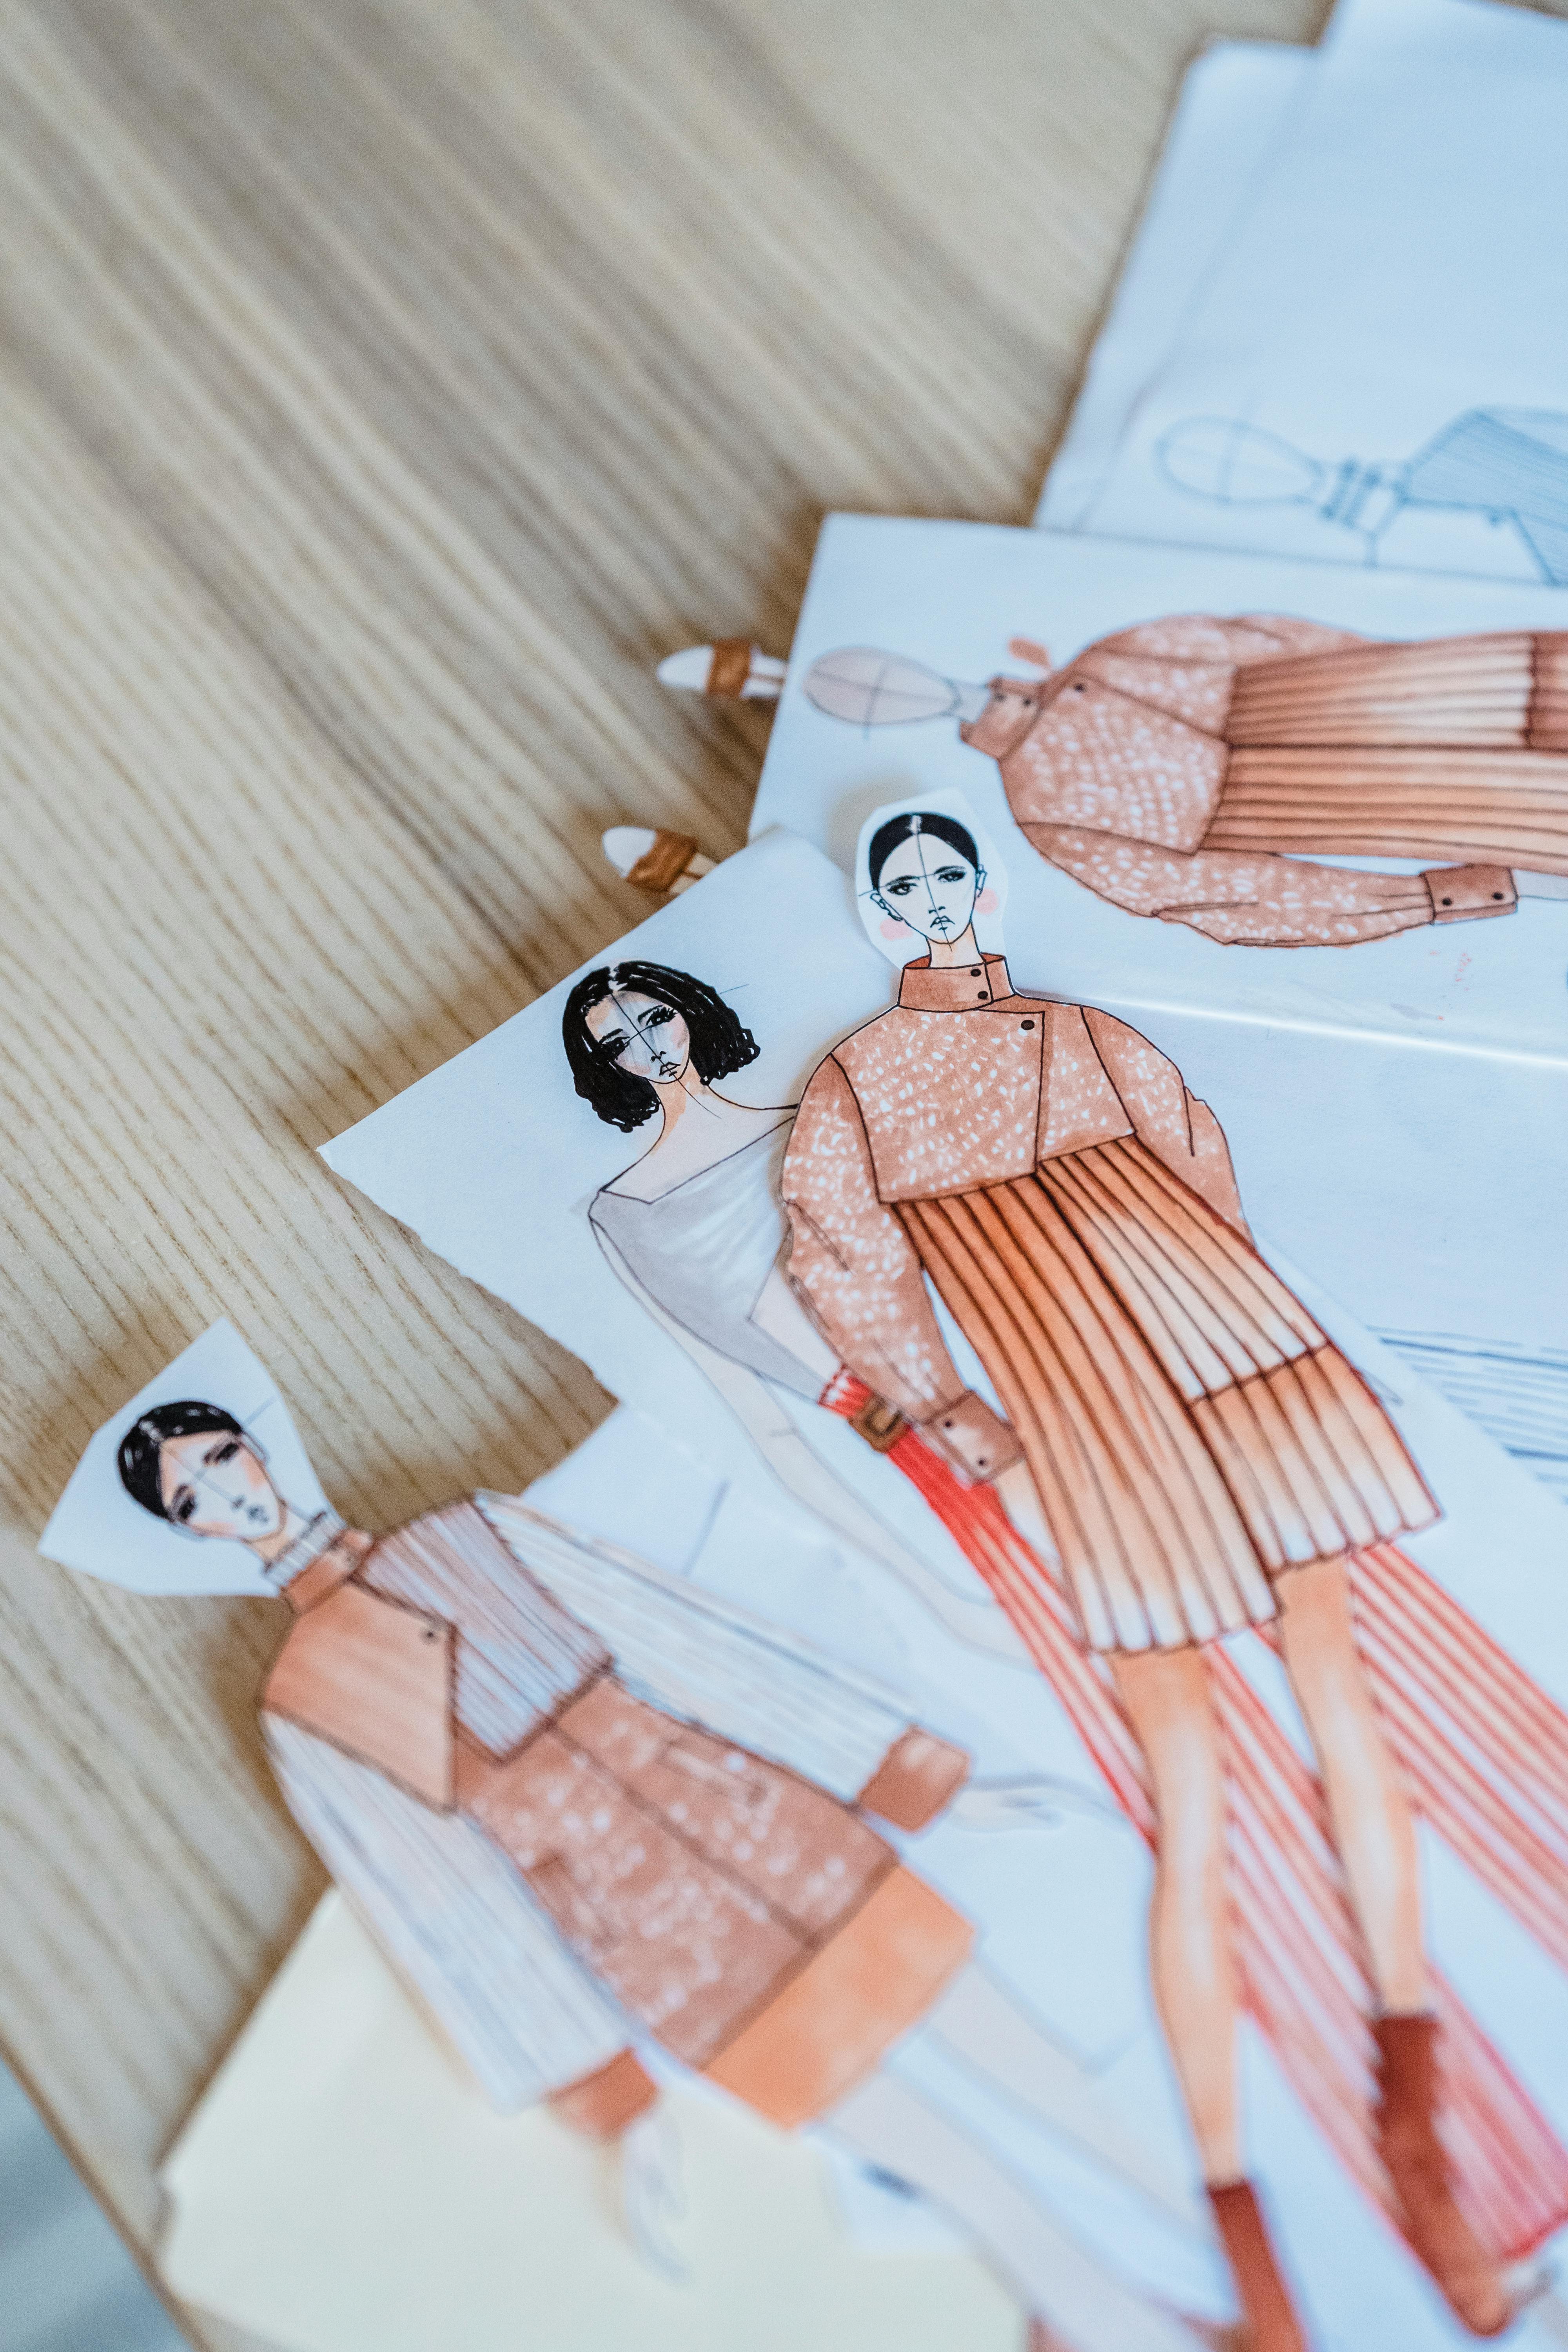 How to Create Fashion Design Sketches for Your Clothing Line